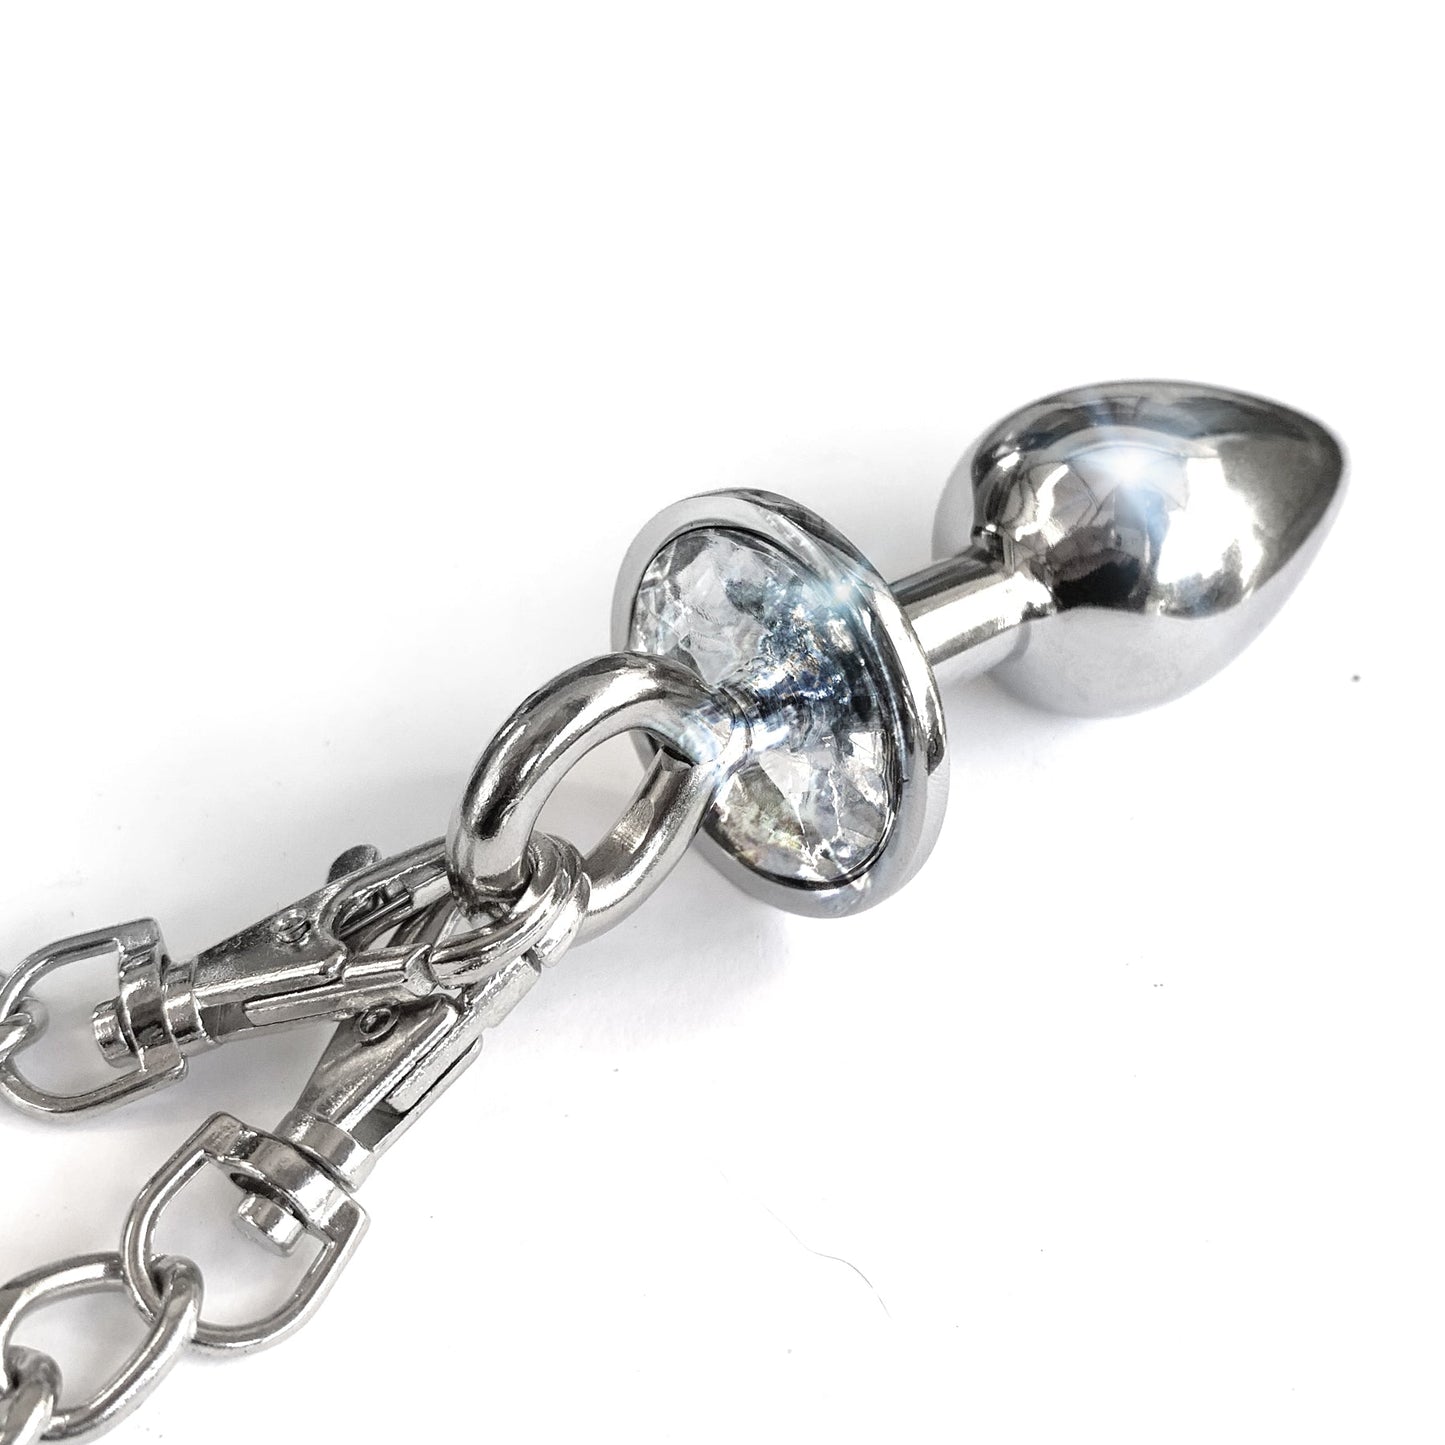 NIXIE Metal Butt Plug and Handcuff Set, Silver - THES